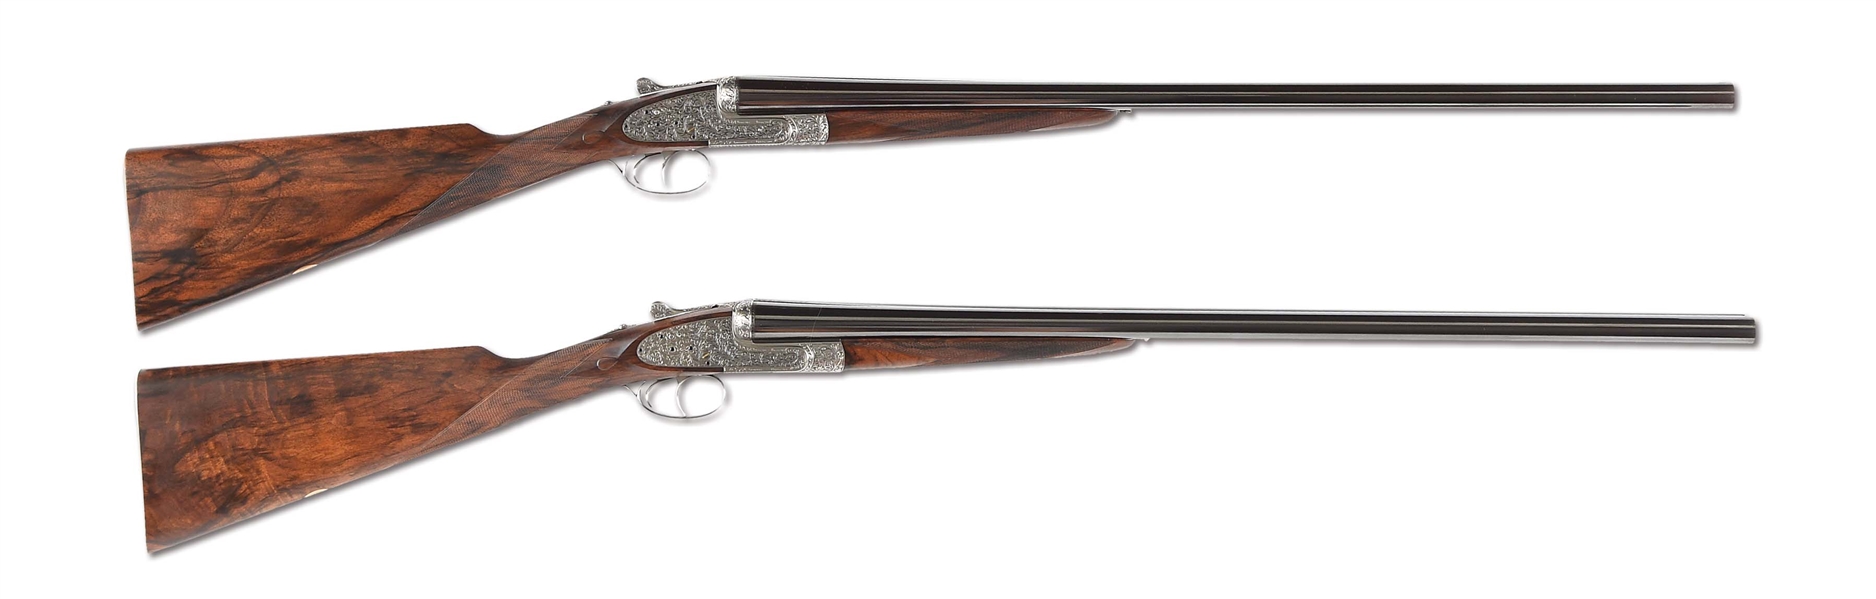 (M) MATCHED PAIR OF HOLLAND & HOLLAND "ROYAL DELUXE" SIDELOCK EJECTOR SELF-OPENING GAME GUNS ENGRAVED BY GEOFFREY CASBARD MADE FOR THE GAME CONSERVANCY IN 1979 IN THEIR MOTOR CASE WITH ACCESSORIES 